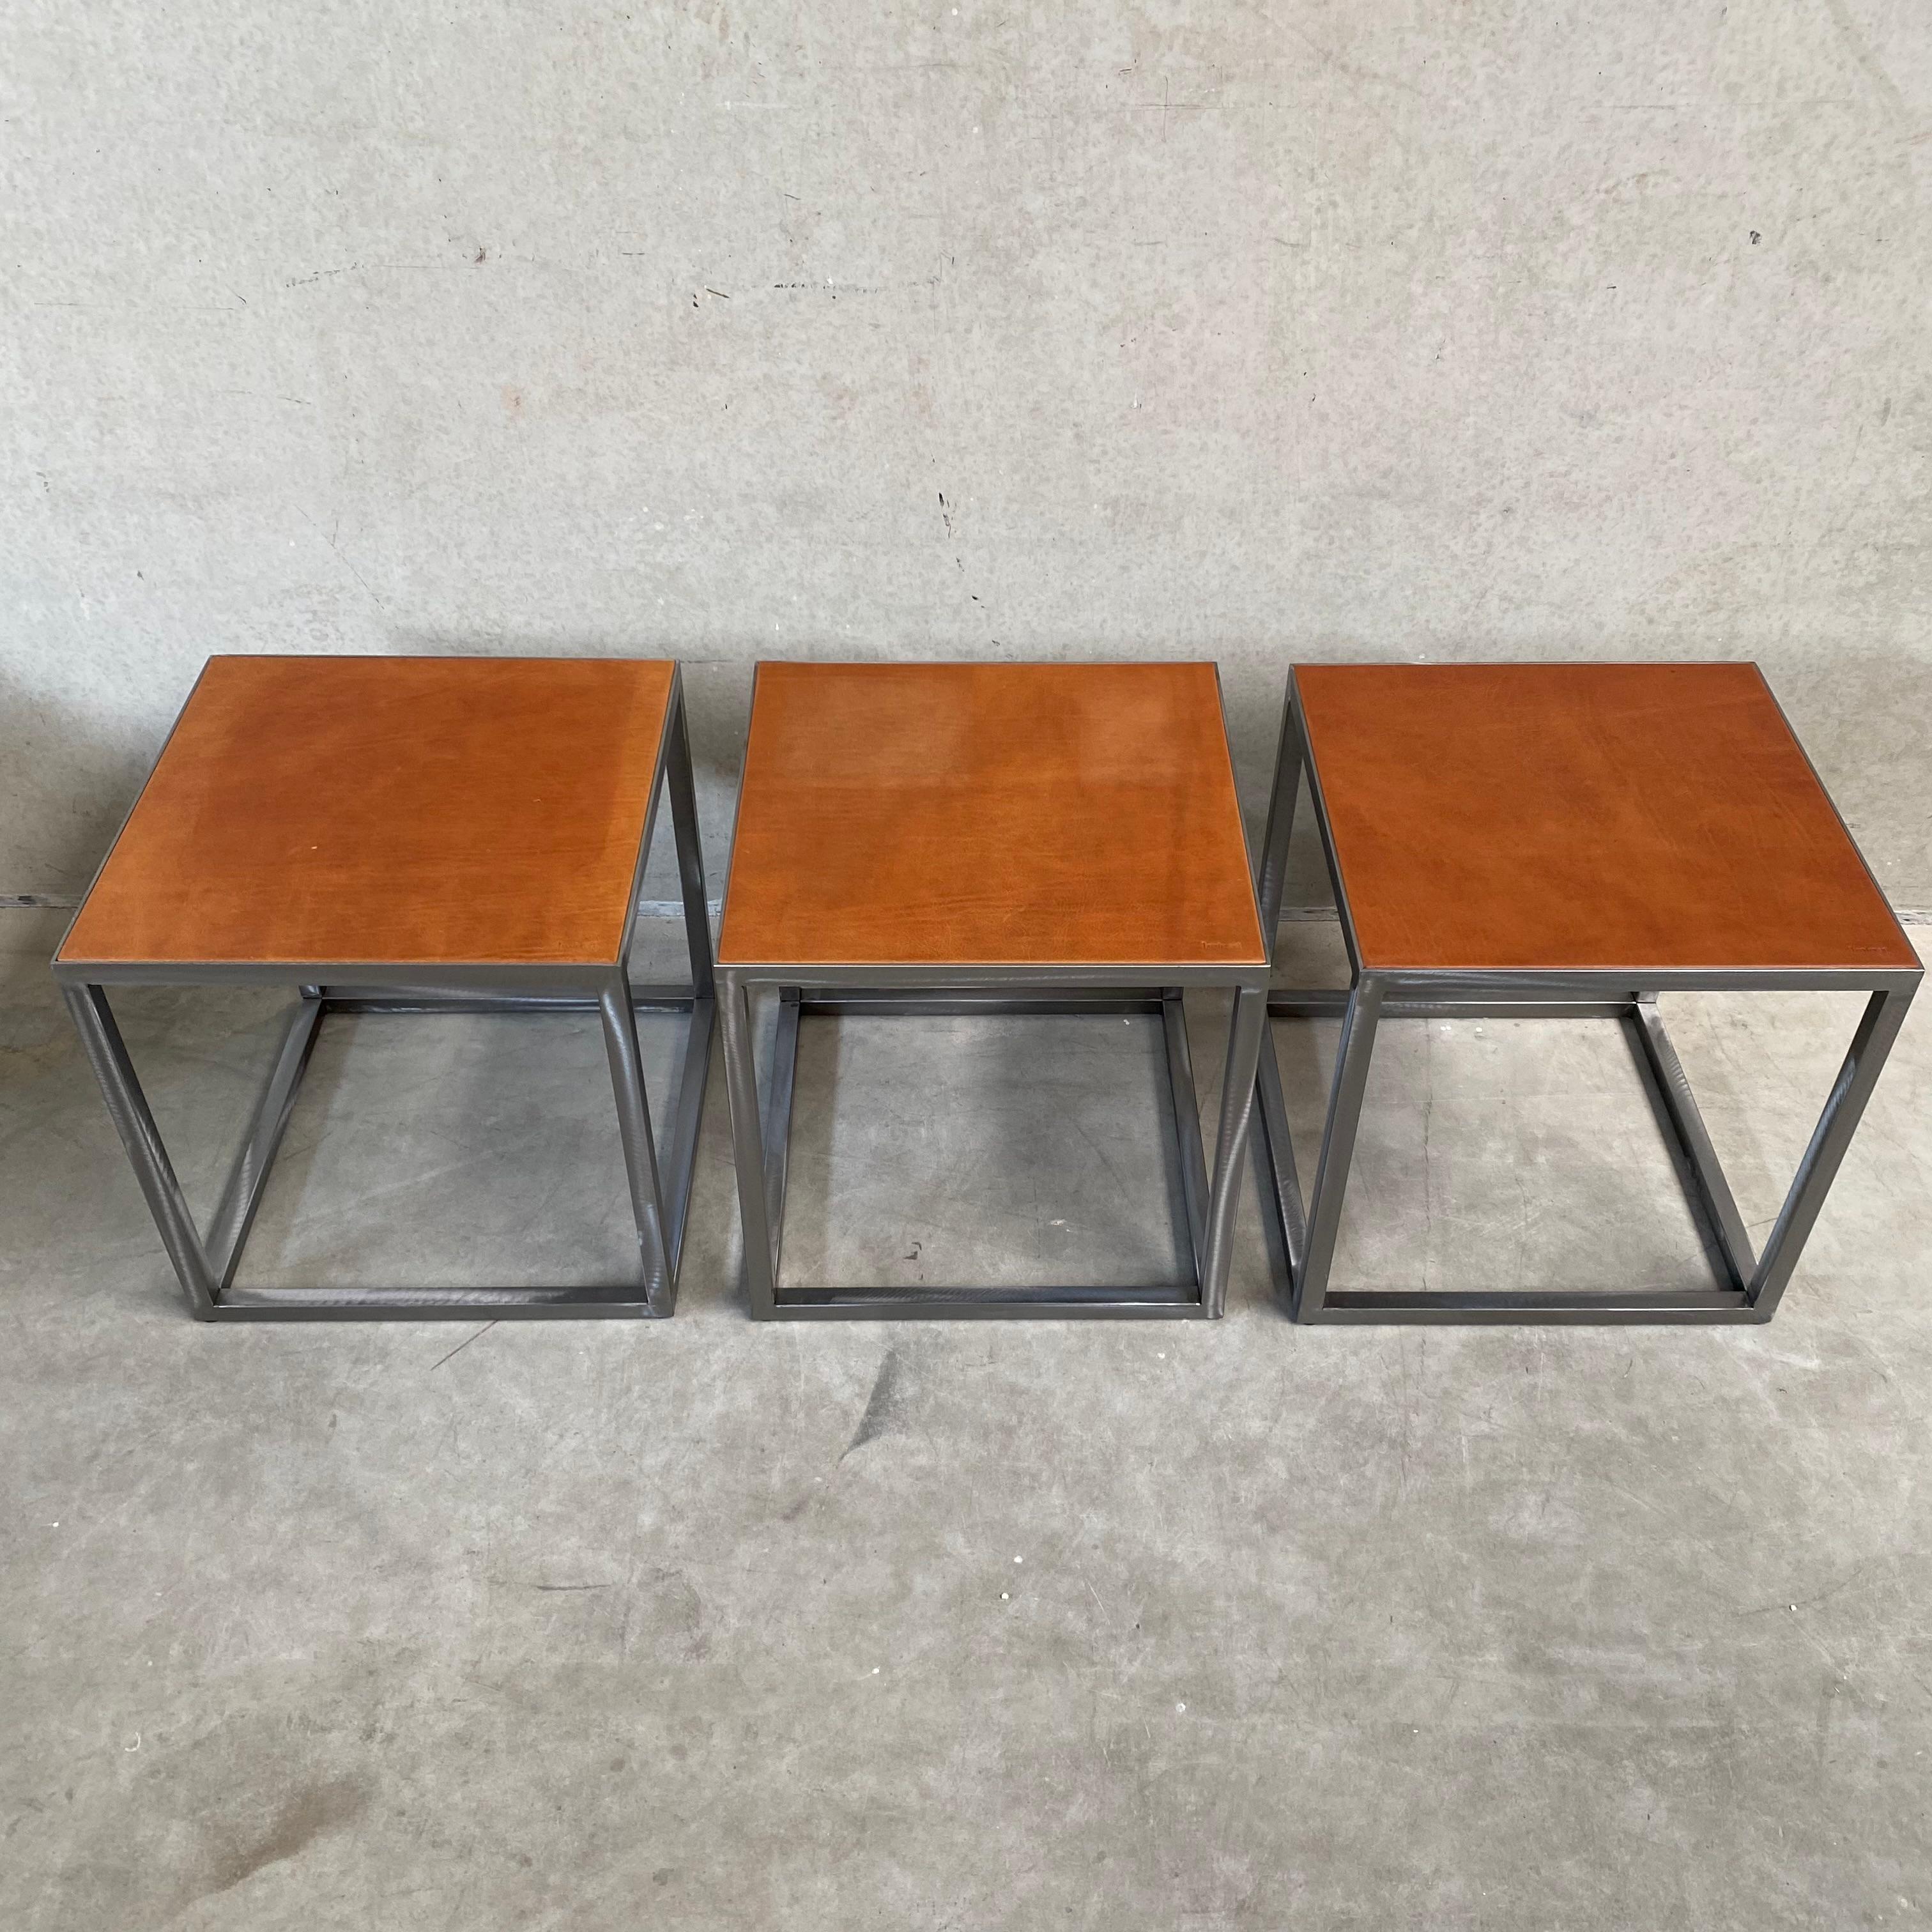 Late 20th Century Baxter Square Cognac Brown Leather Coffee Table Side Table 